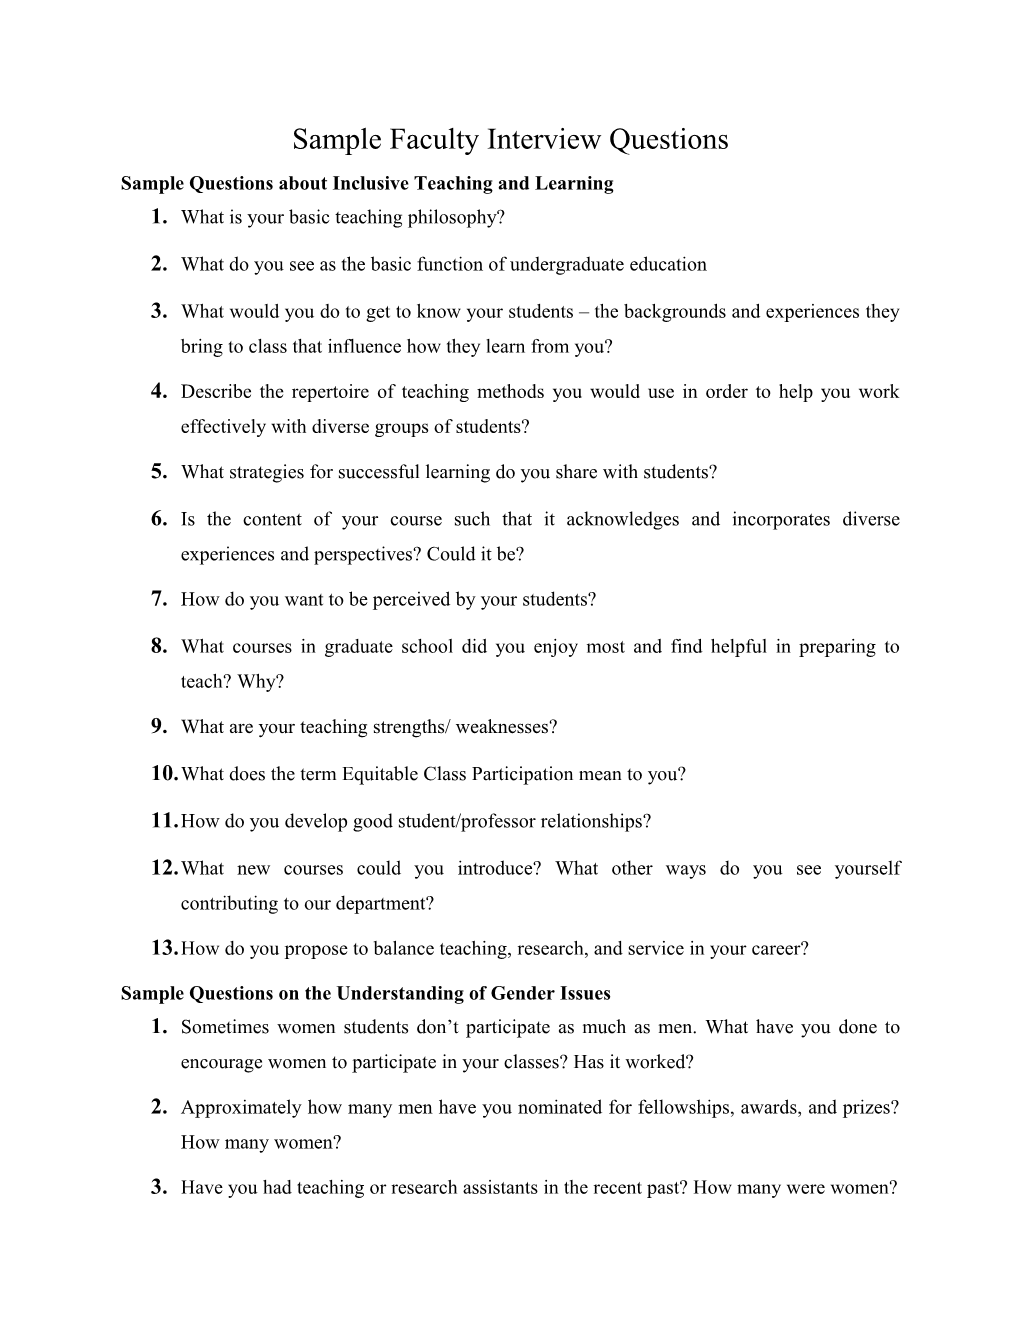 Sample Questions About Inclusive Teaching and Learning